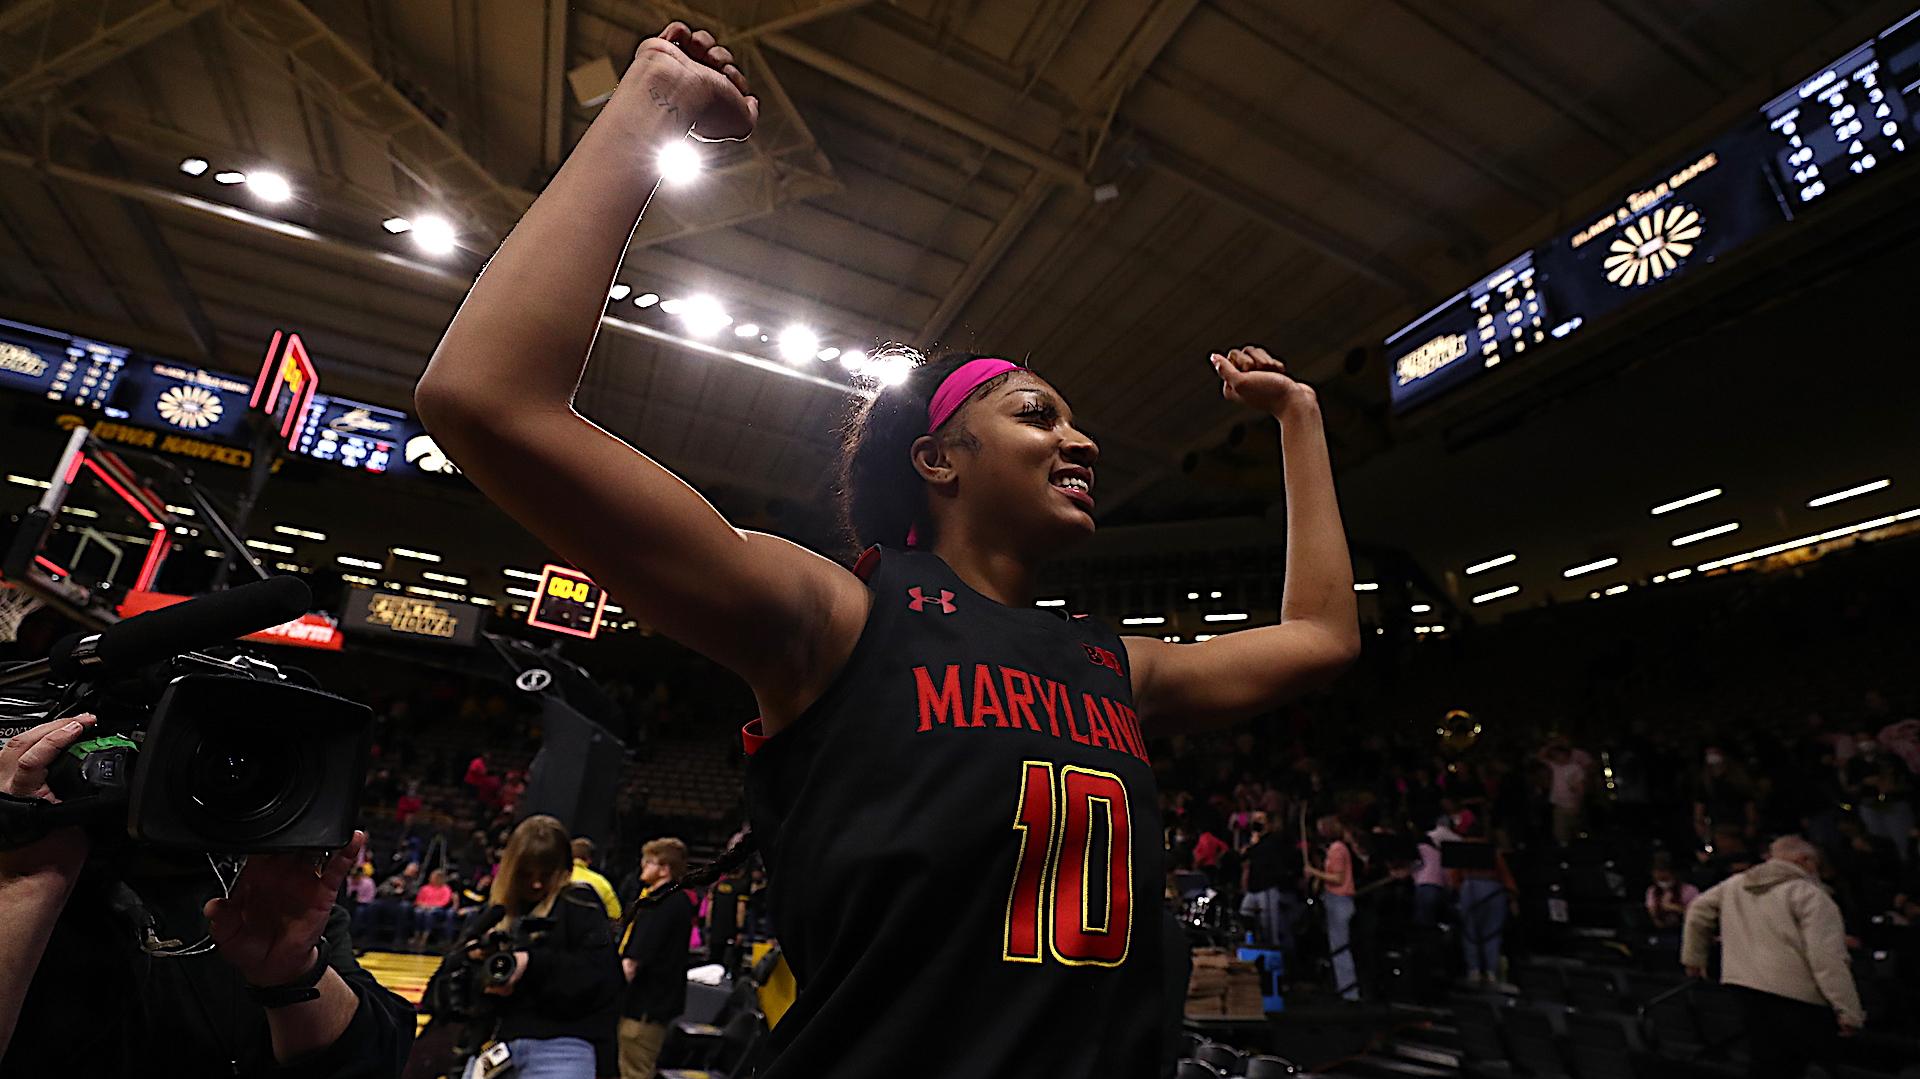 No Terps Win Seventh In Row At Iowa